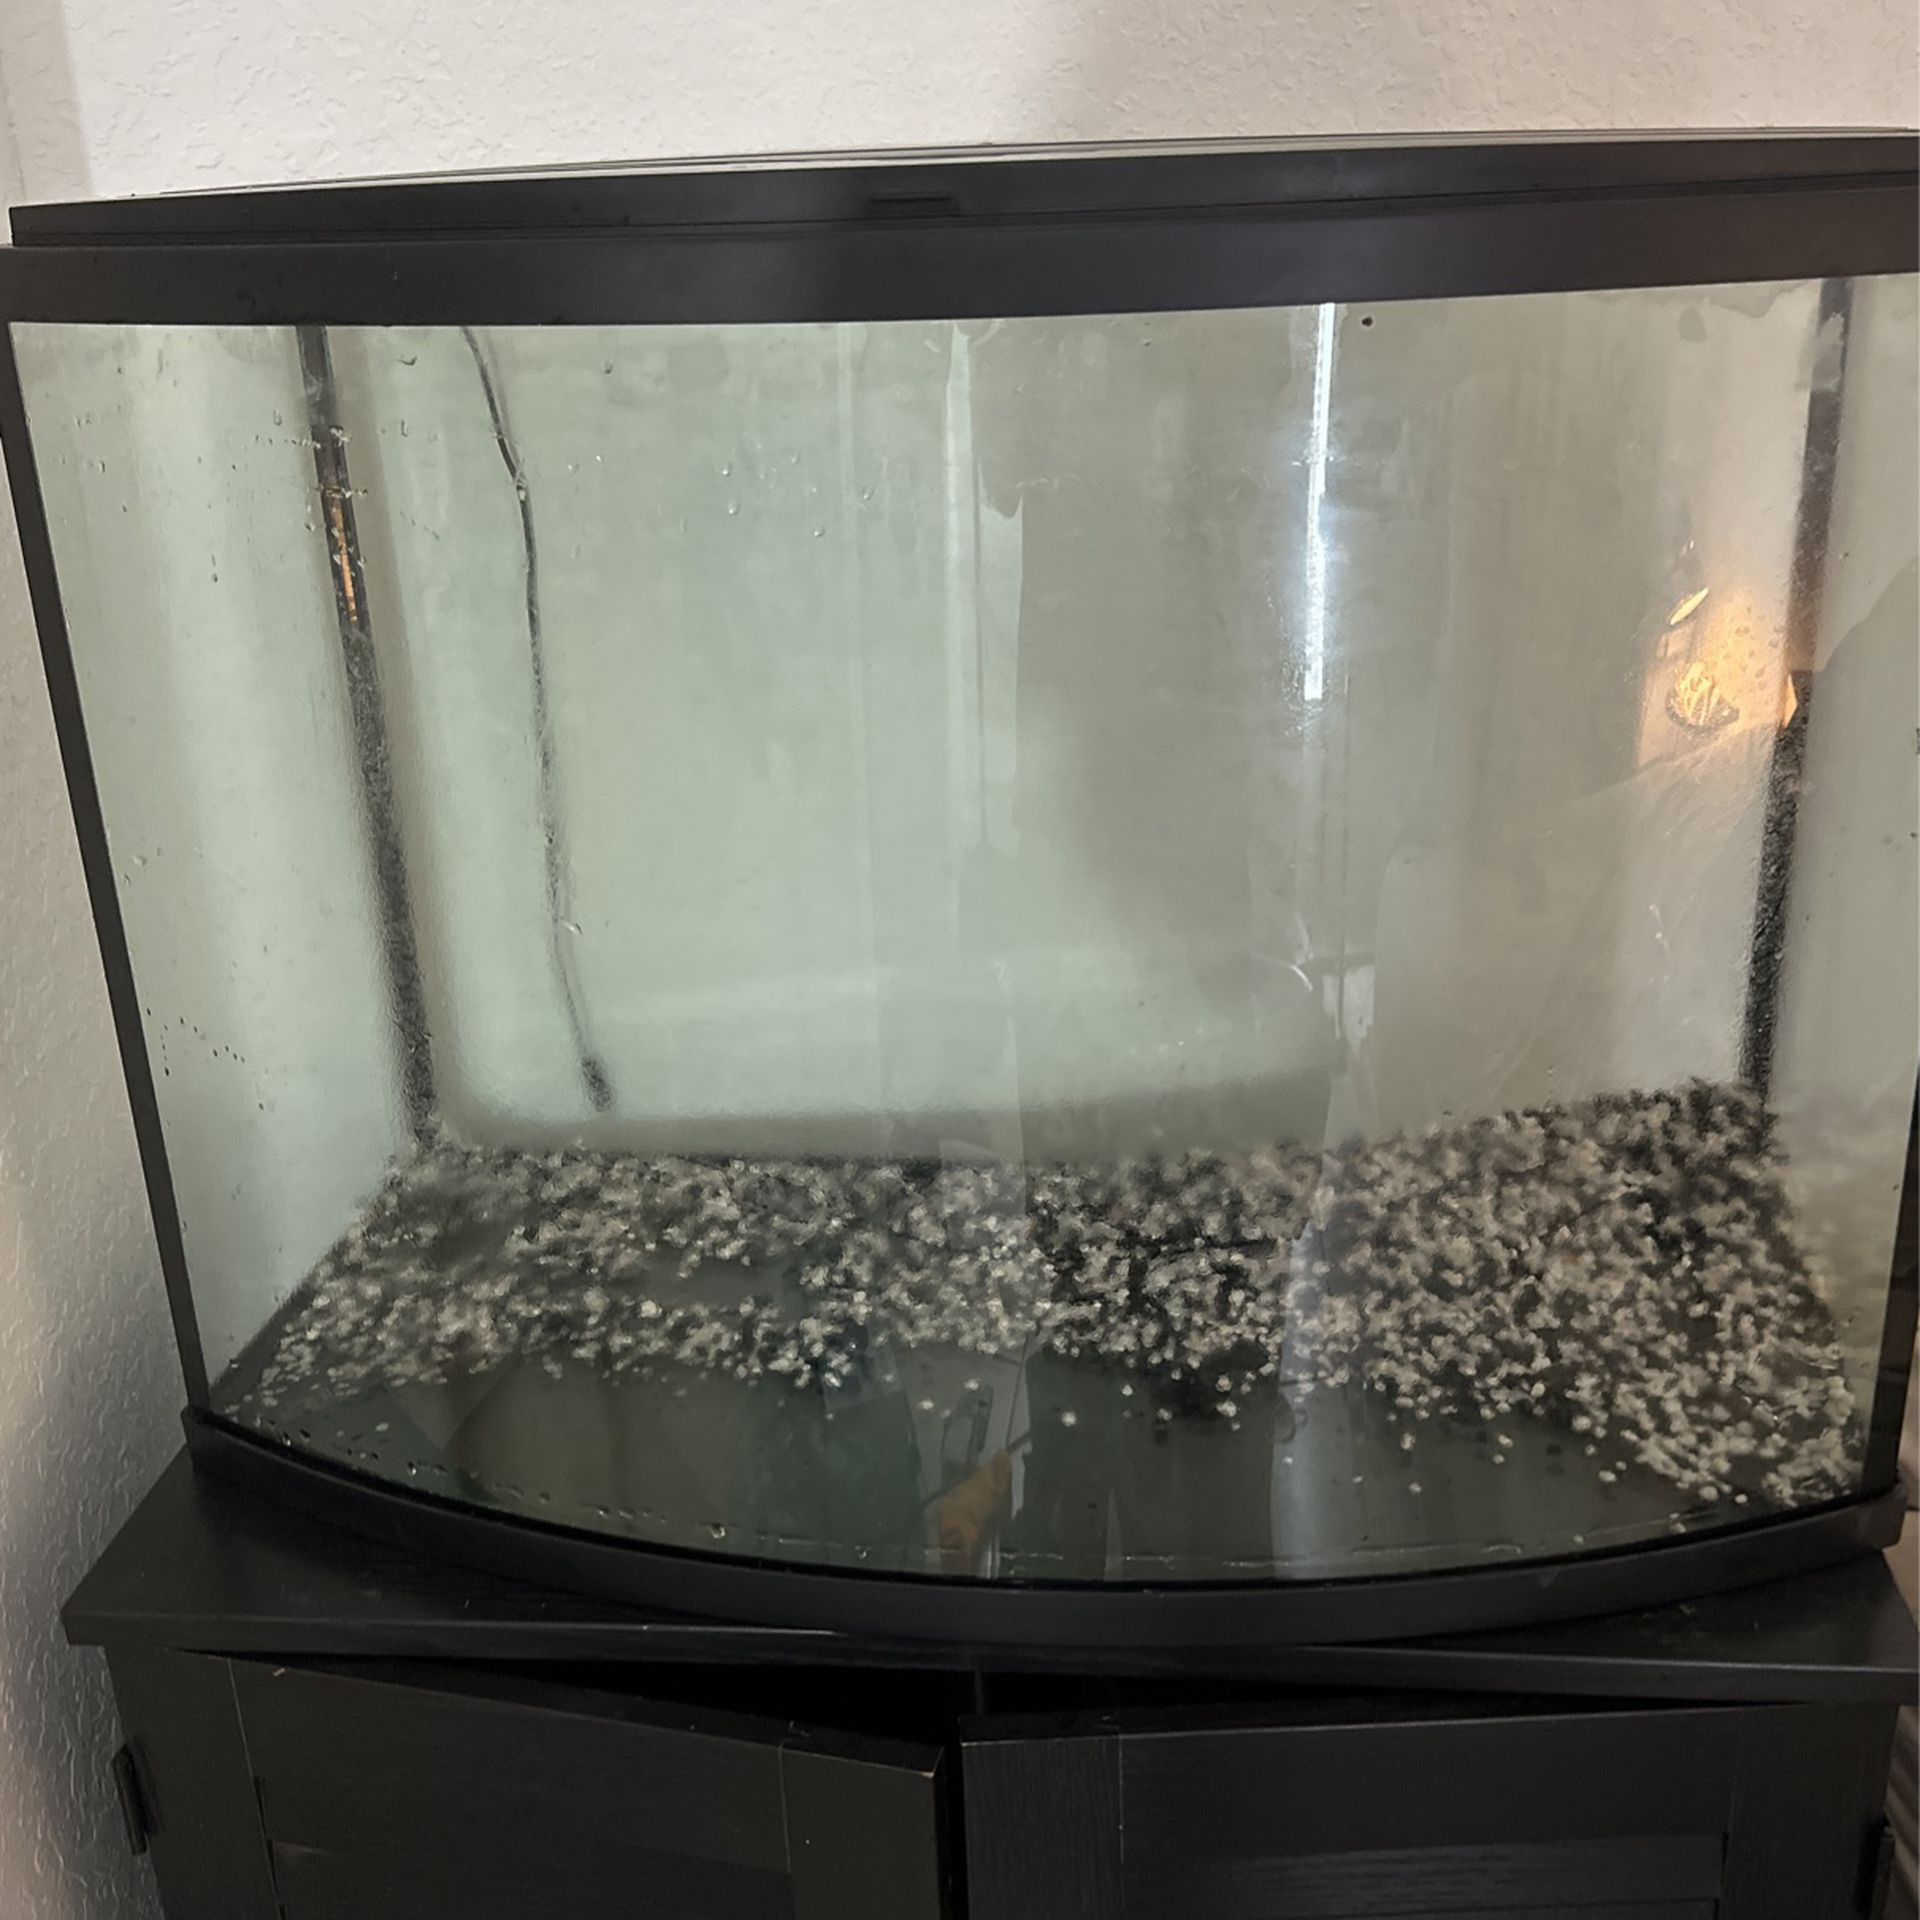 36 Gal Bow front Tank And Stand 